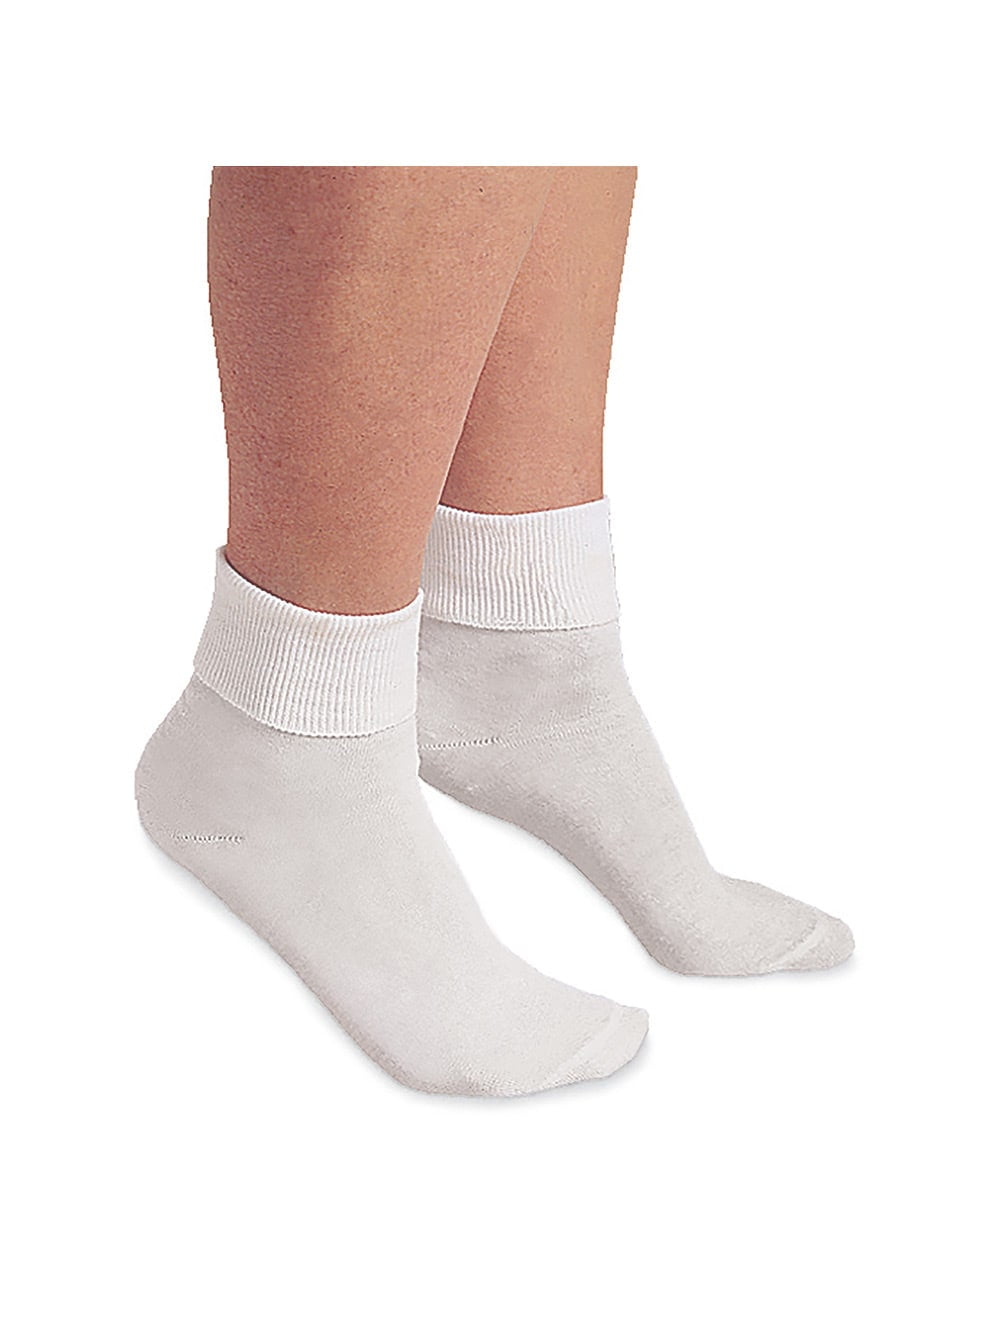 Mens Boys Assorted Mixed Trainer Socks Sports Cotton Ankle Training UK 6-11 